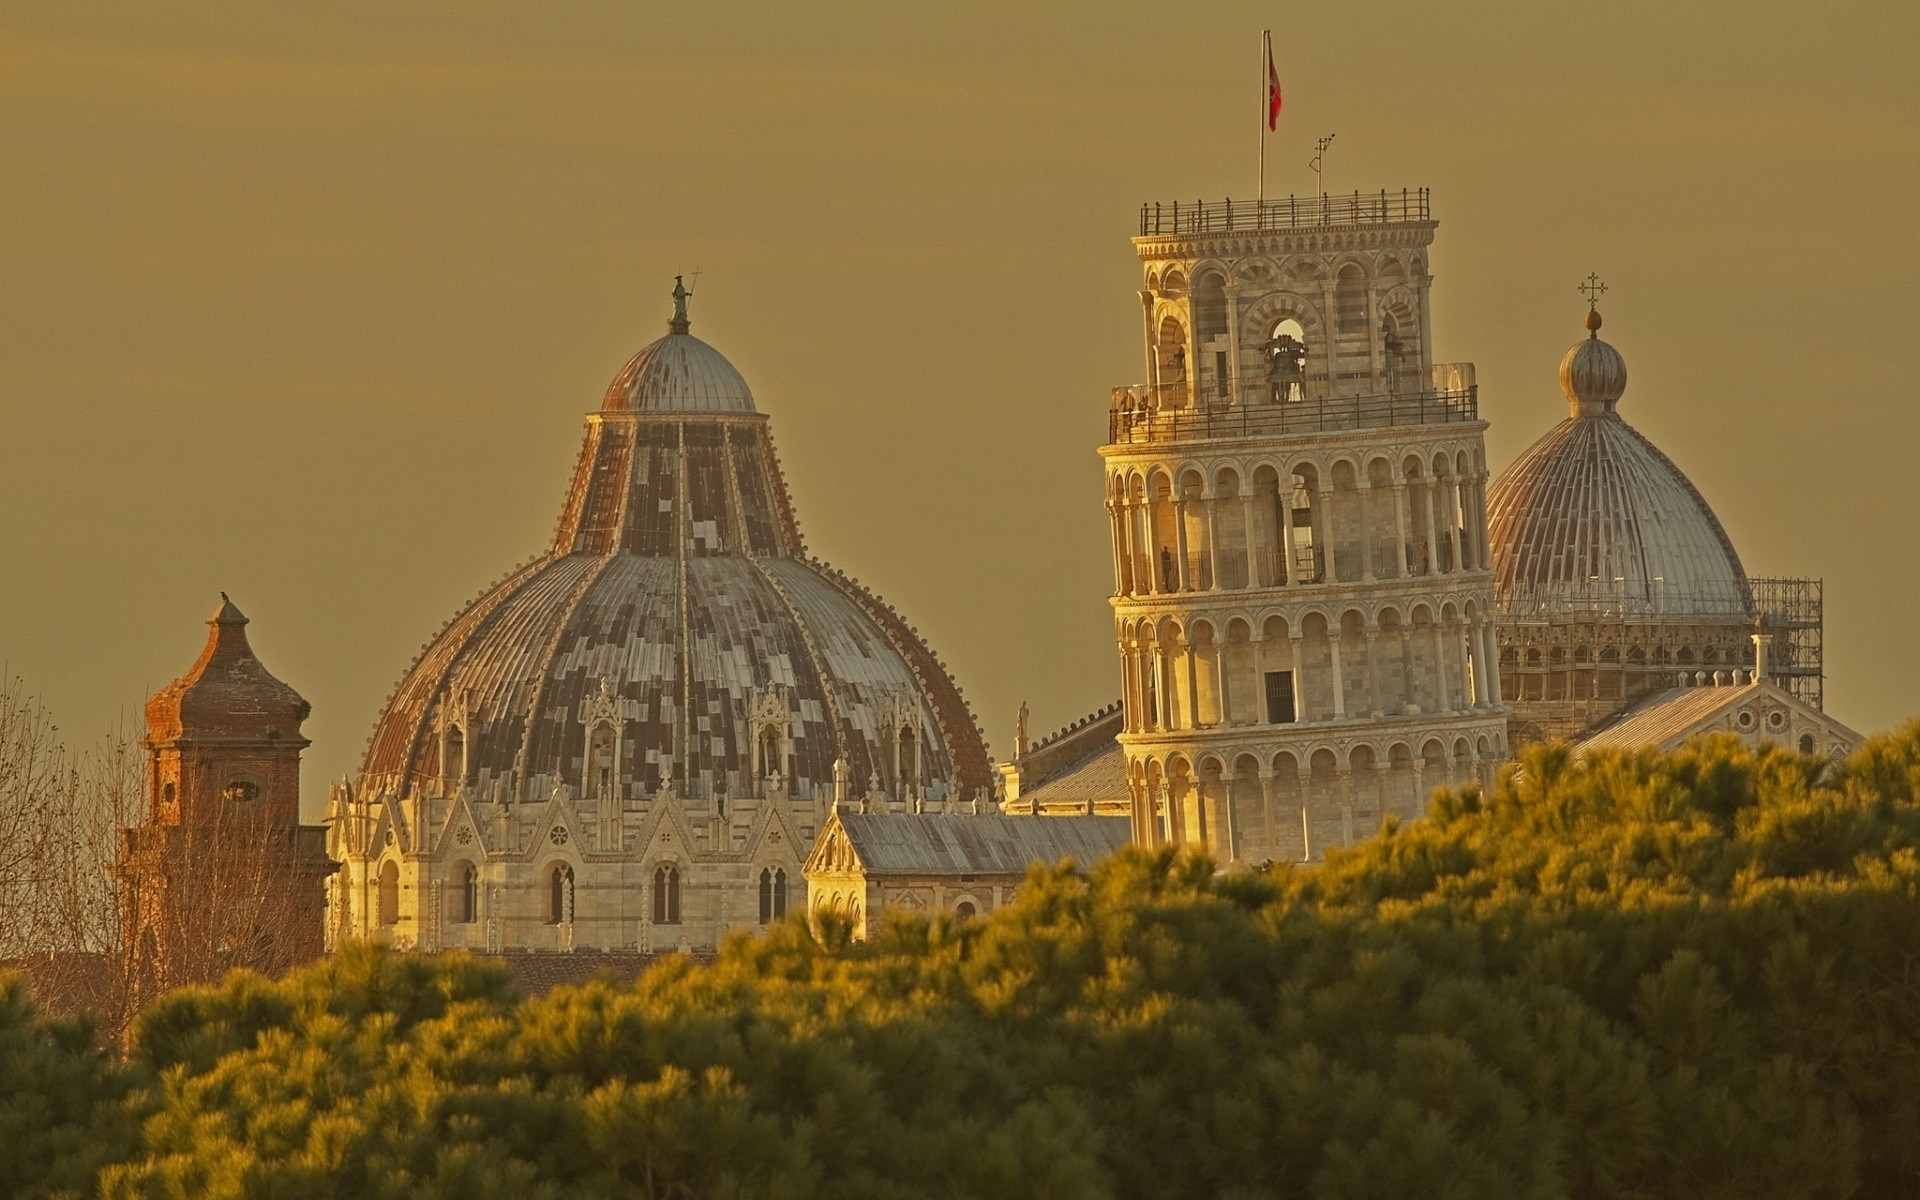 Leaning Tower of Pisa, Italy, Architecture Wallpaper